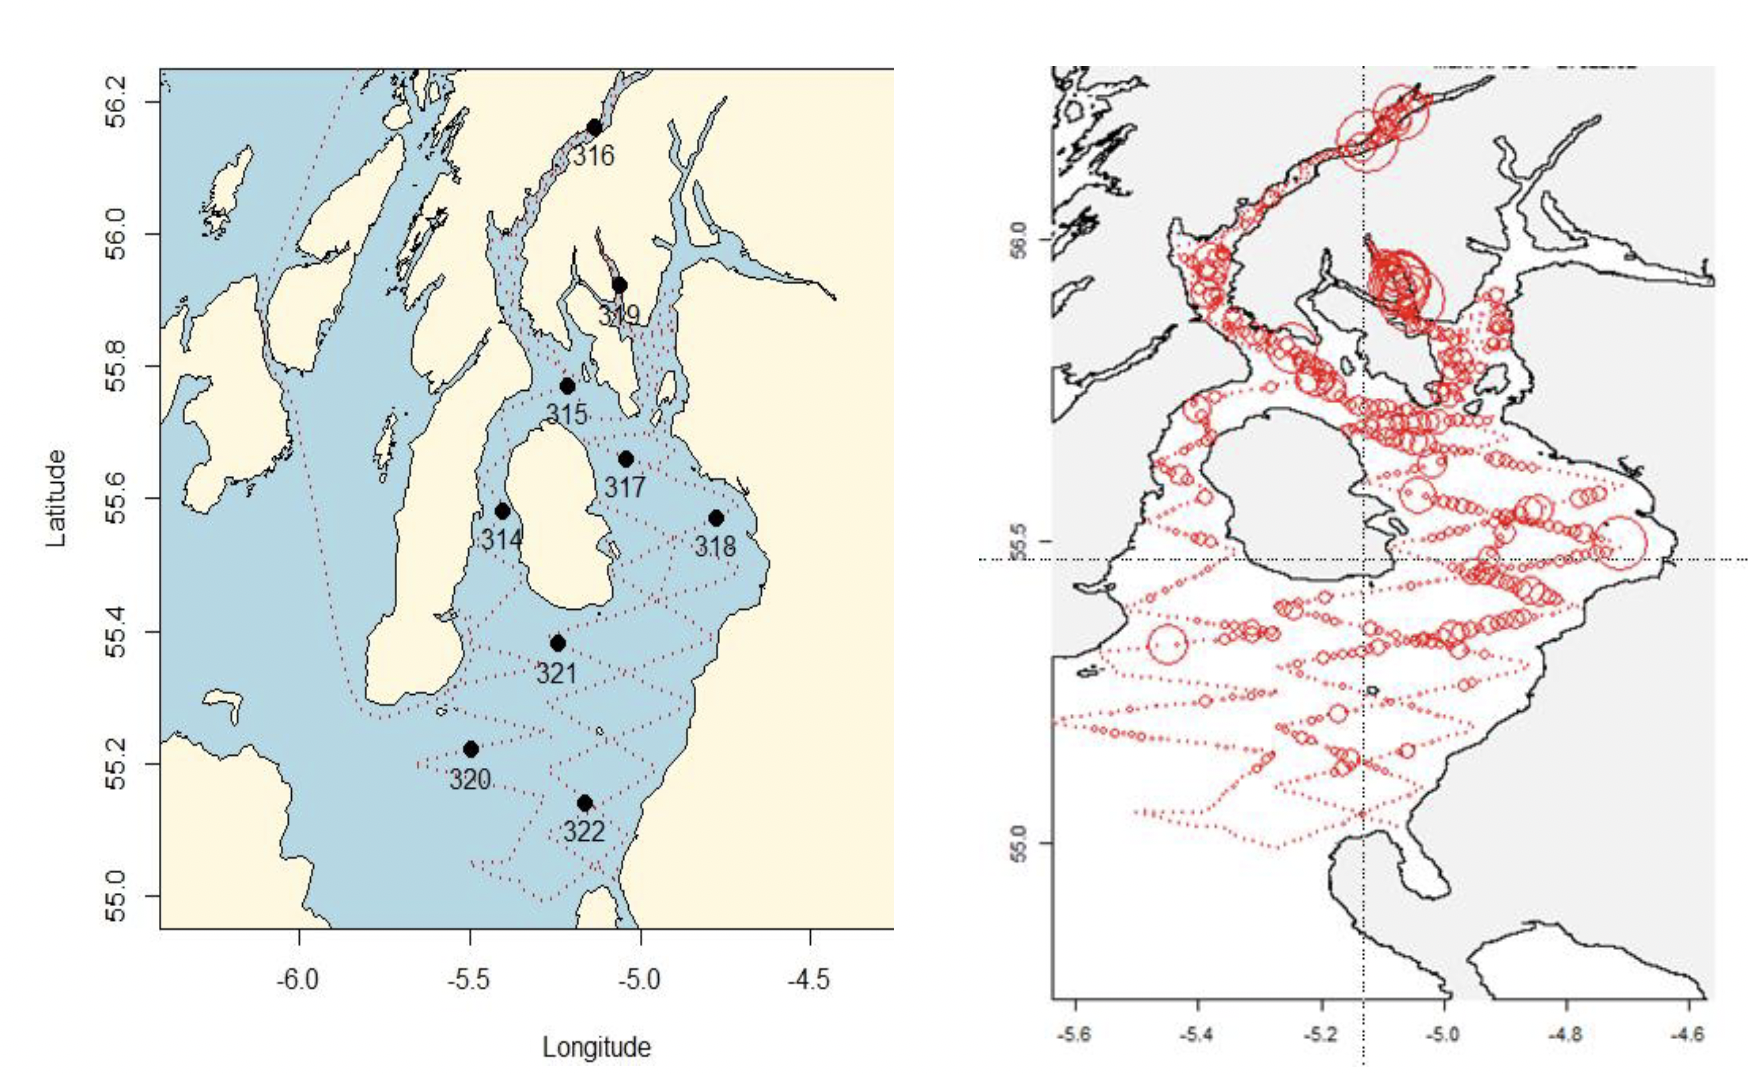 Herring from the Firth of Clyde maps. Left map shows cruise track for MRV Alba na Mara with haul positions. Right map shows density of clupeids during Clyde pelagic acoustic survey in 2015. Abundance of herring is a small proportion of the observed clupeid traces